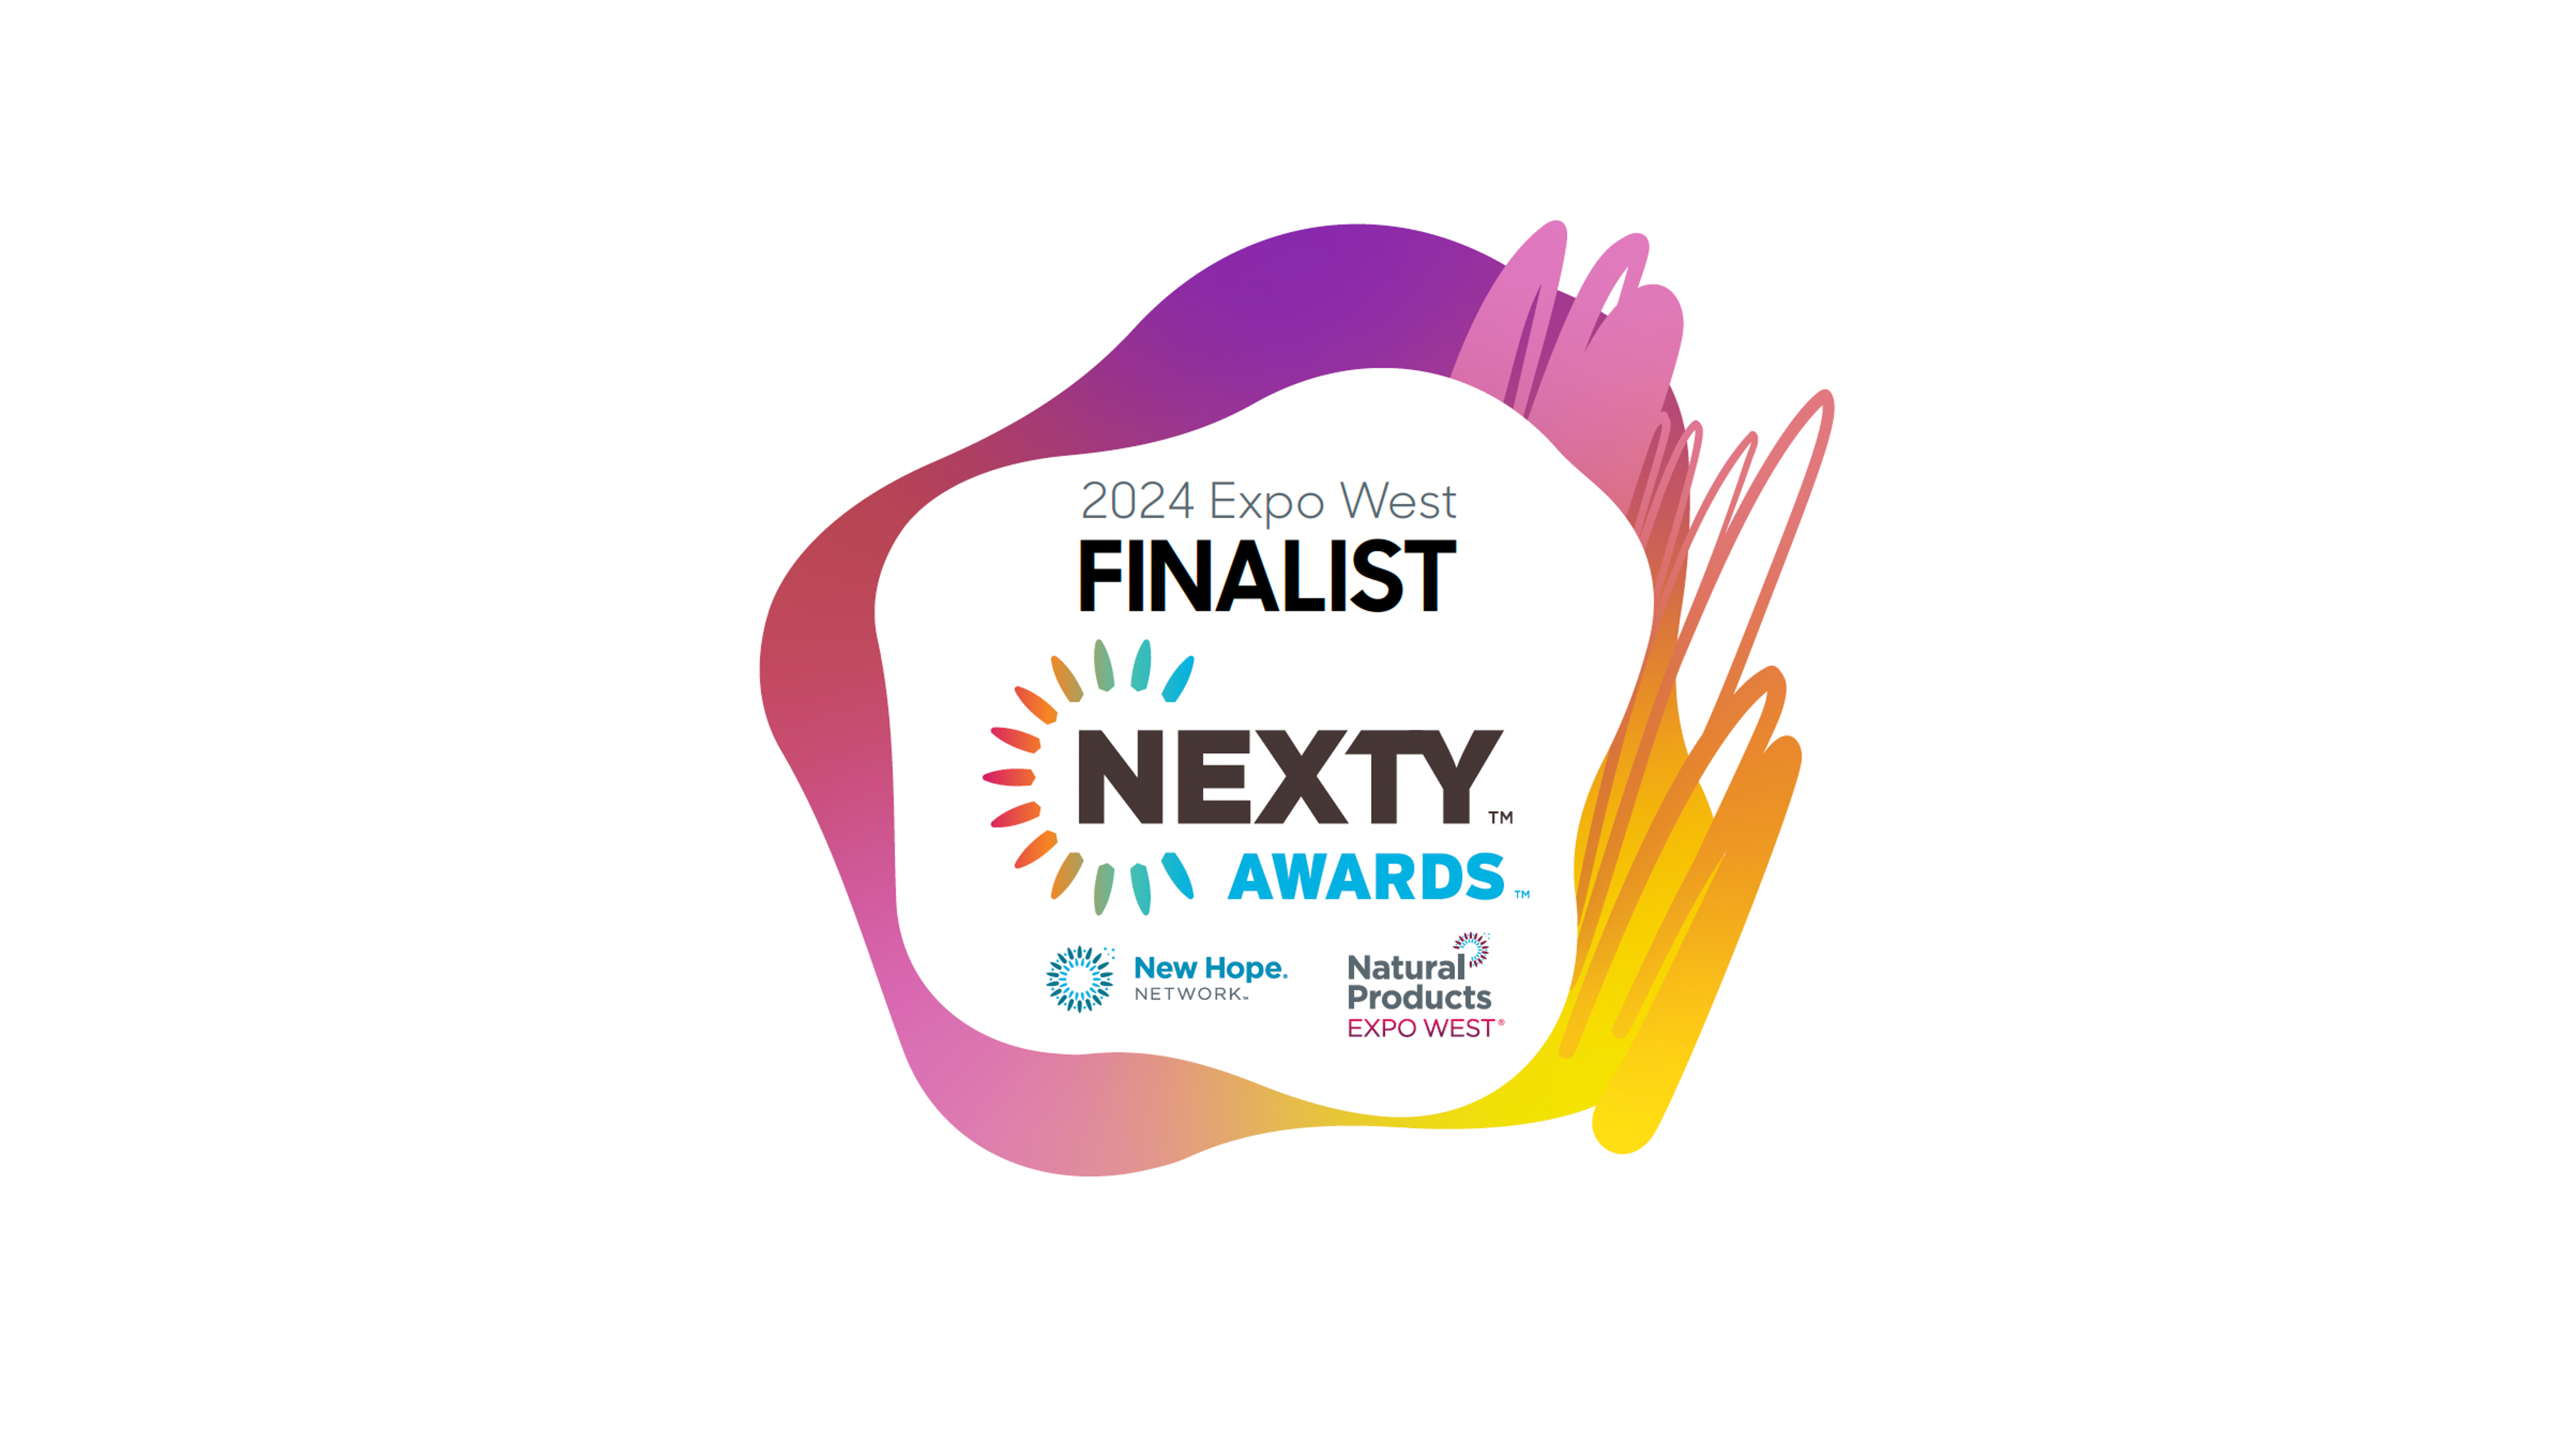 Natural Products Expo West 2024"NEXTY Award finalists"に選出されました。